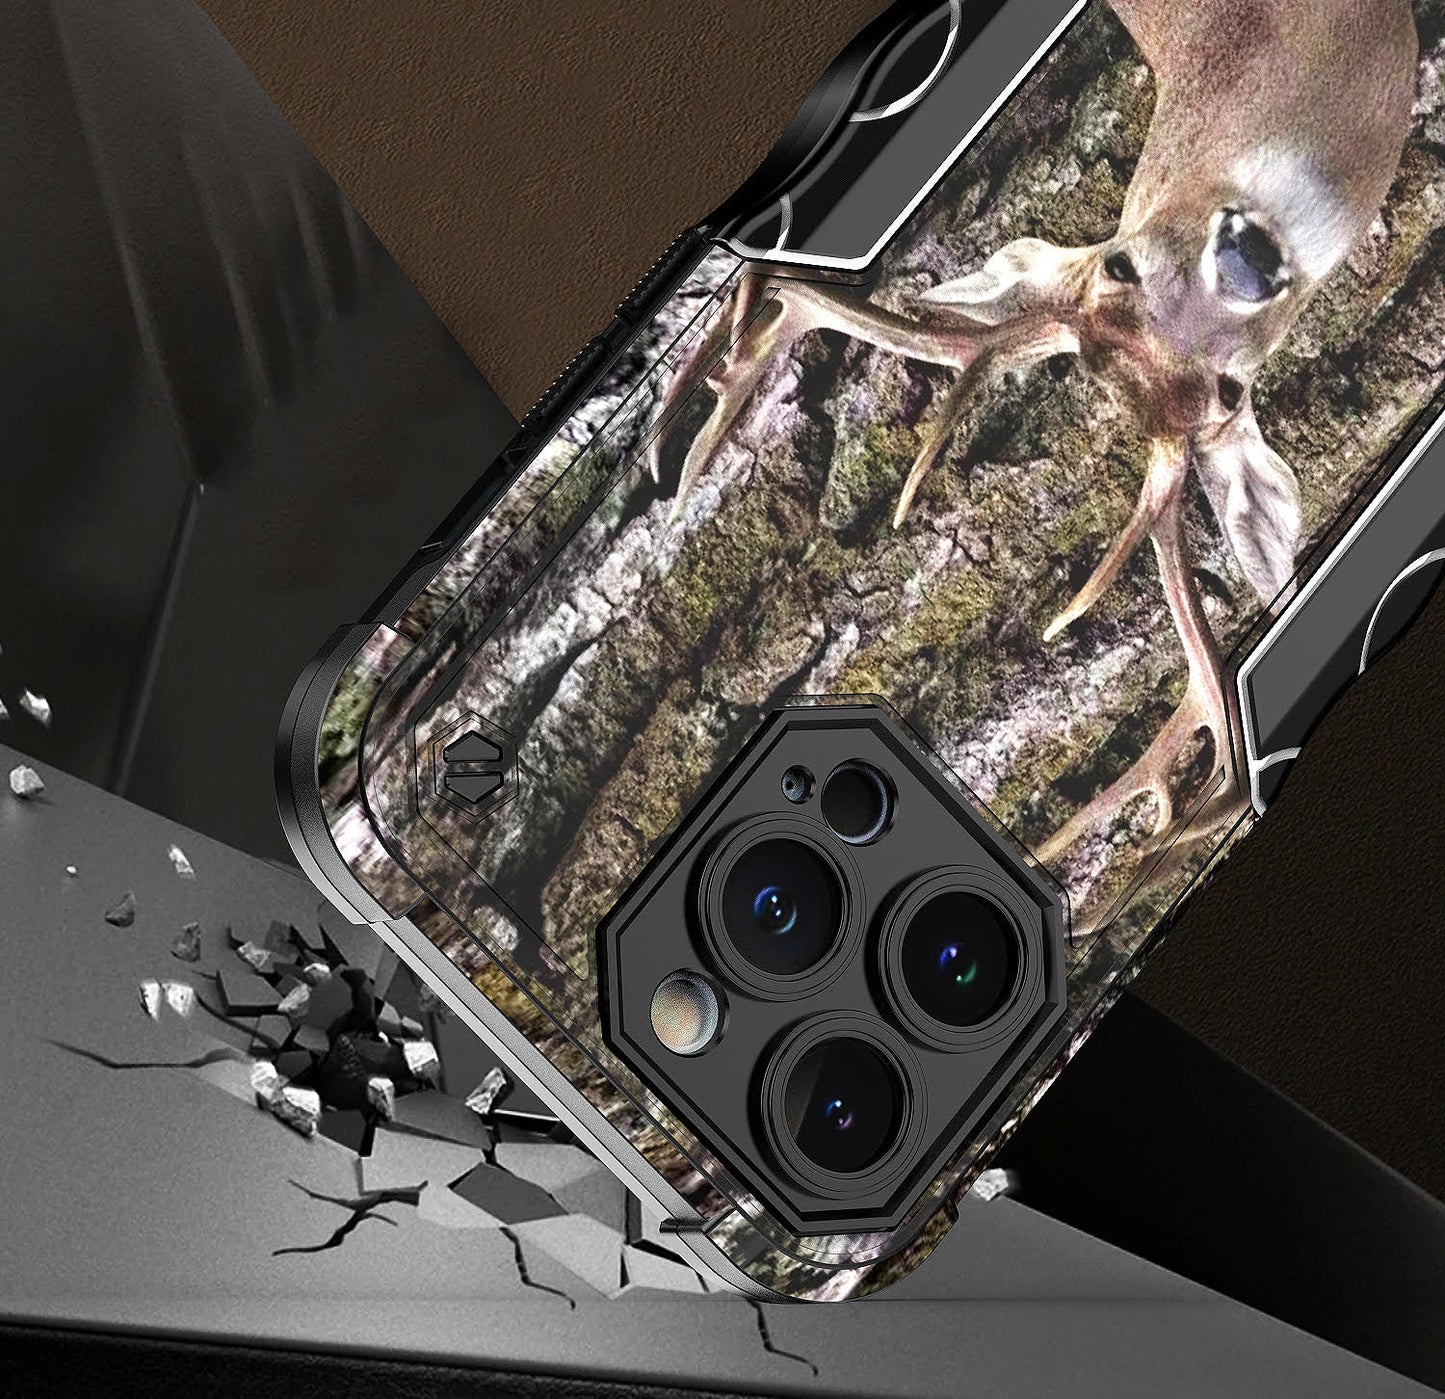 Case For Apple iPhone 13 Pro - Hybrid Grip Design Shockproof Phone Cover - Whitetail Deer